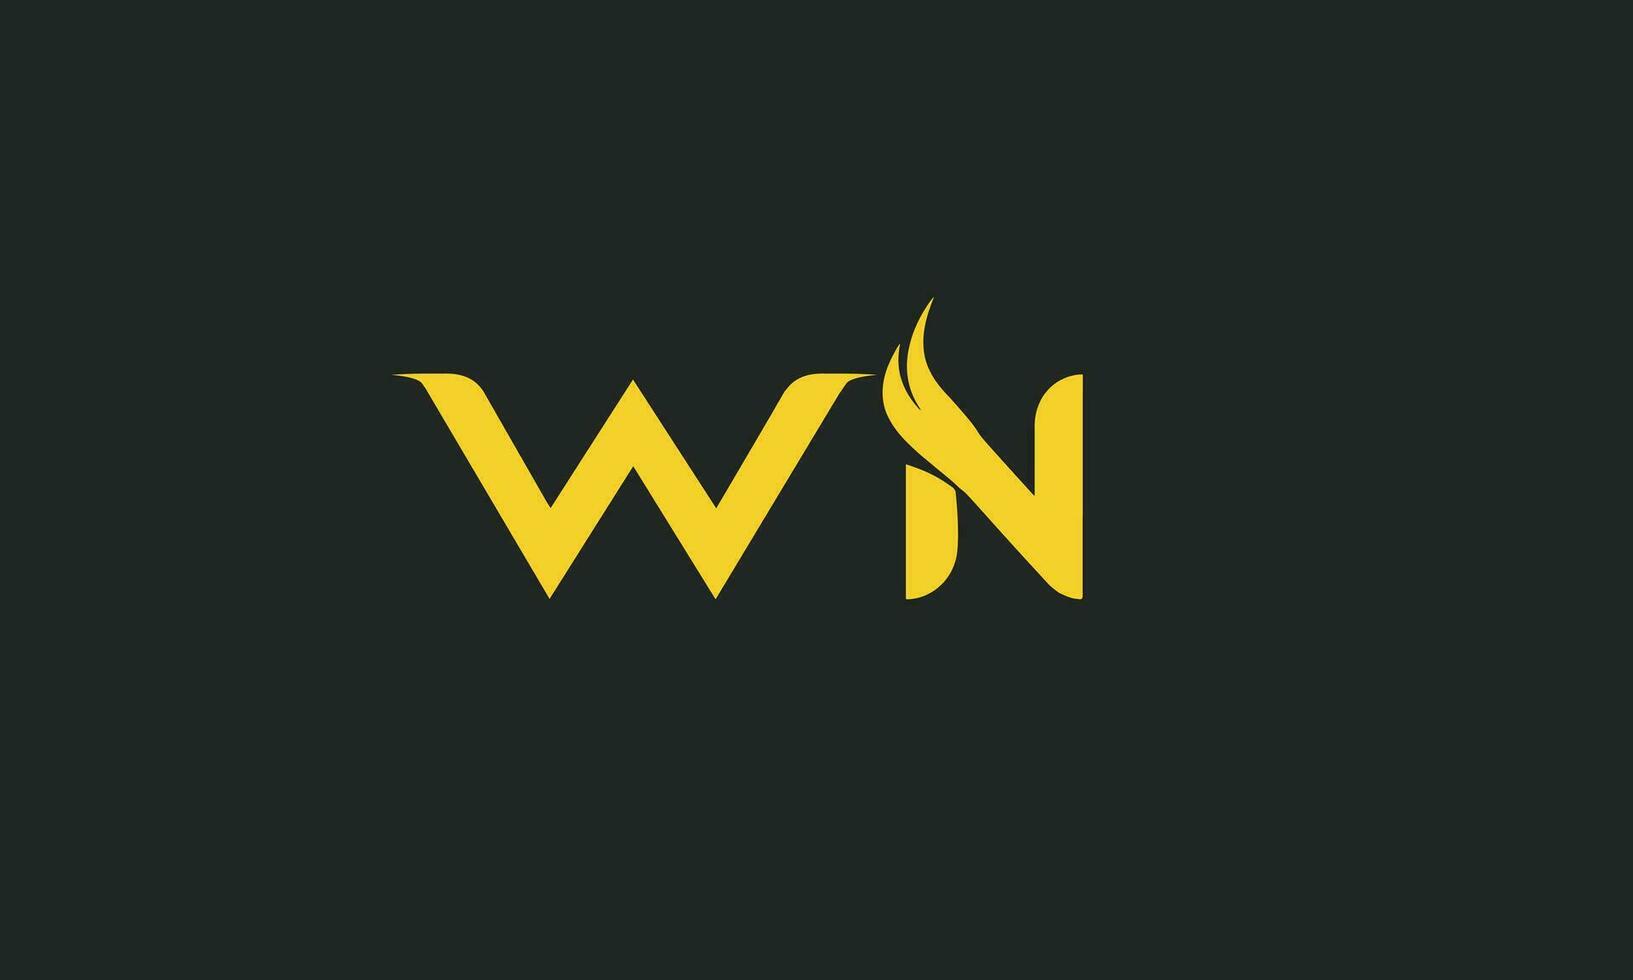 WN or NW Letters Logo Design vector